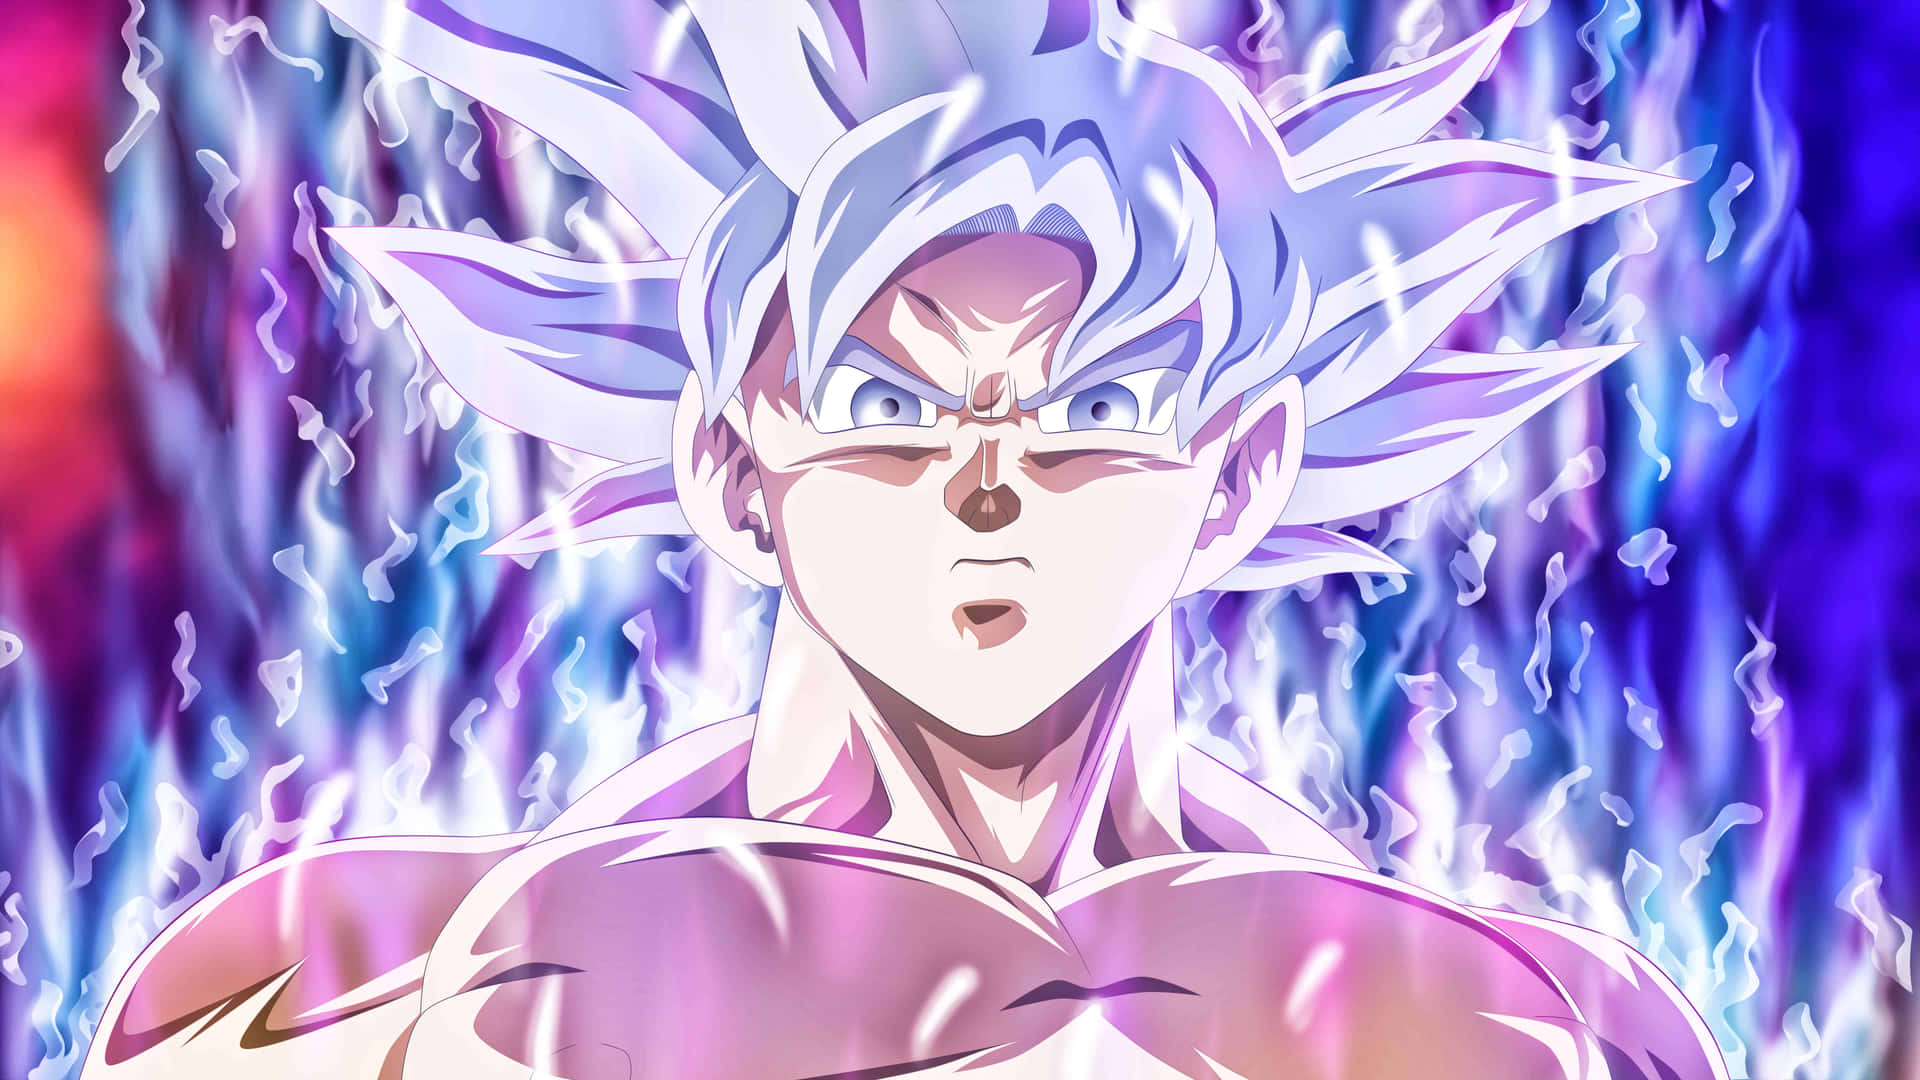 Tap into the ultimate power with Goku's Ultra Instinct form Wallpaper